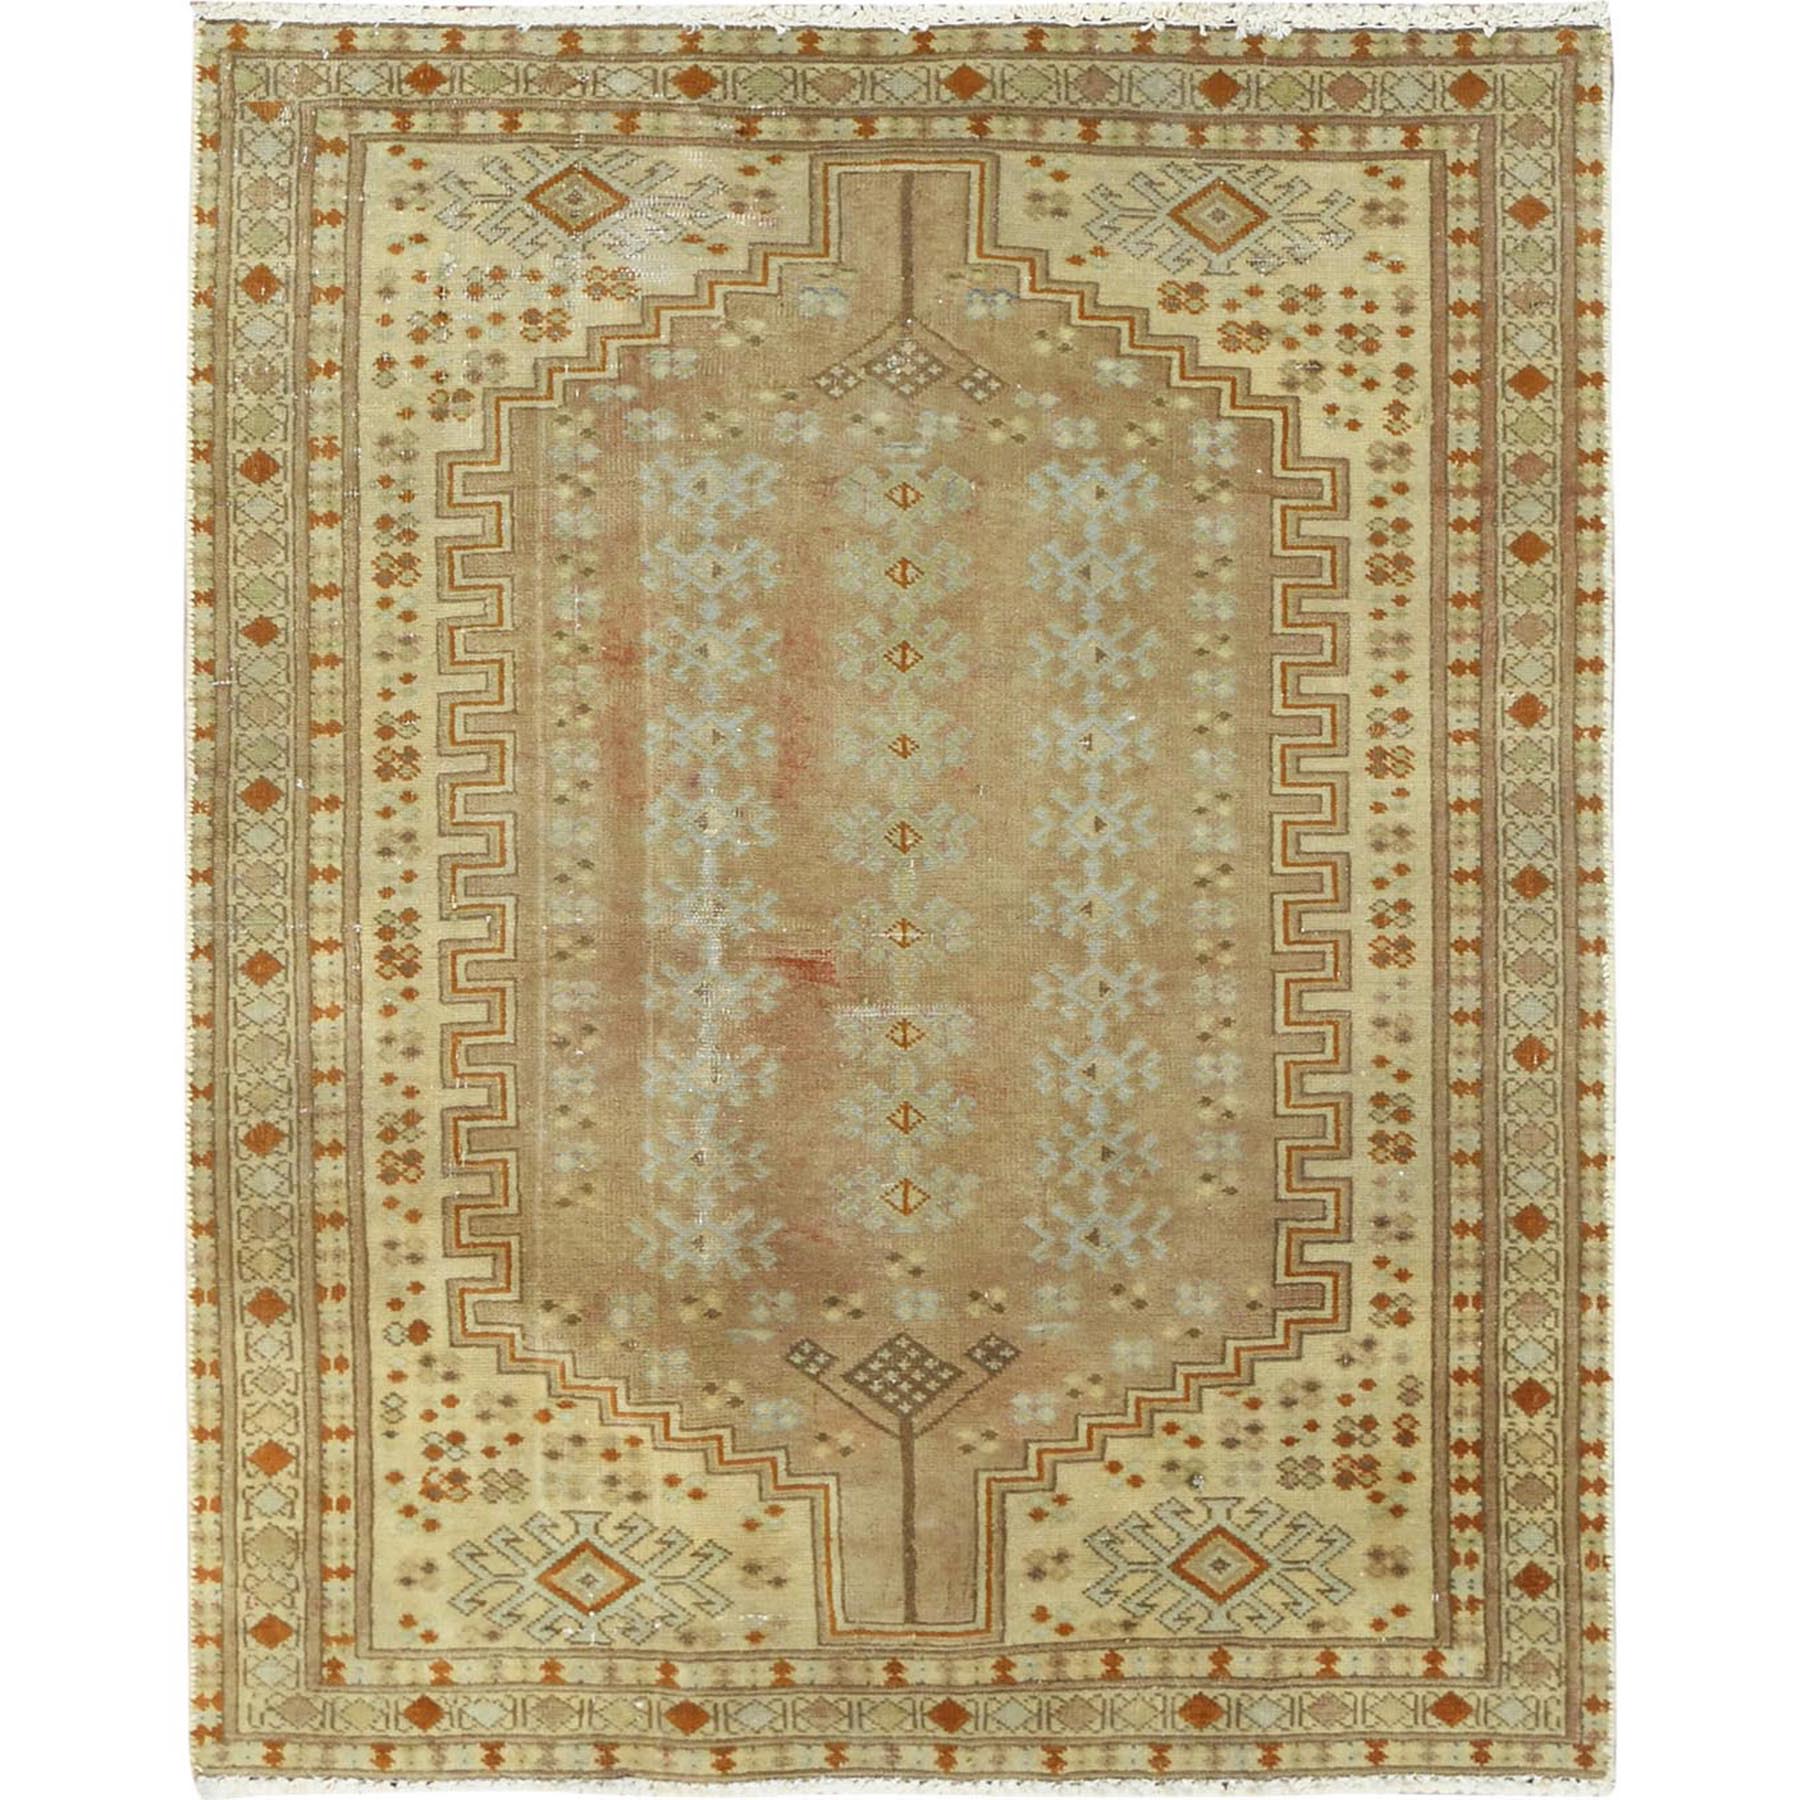  Wool Hand-Knotted Area Rug 3'4